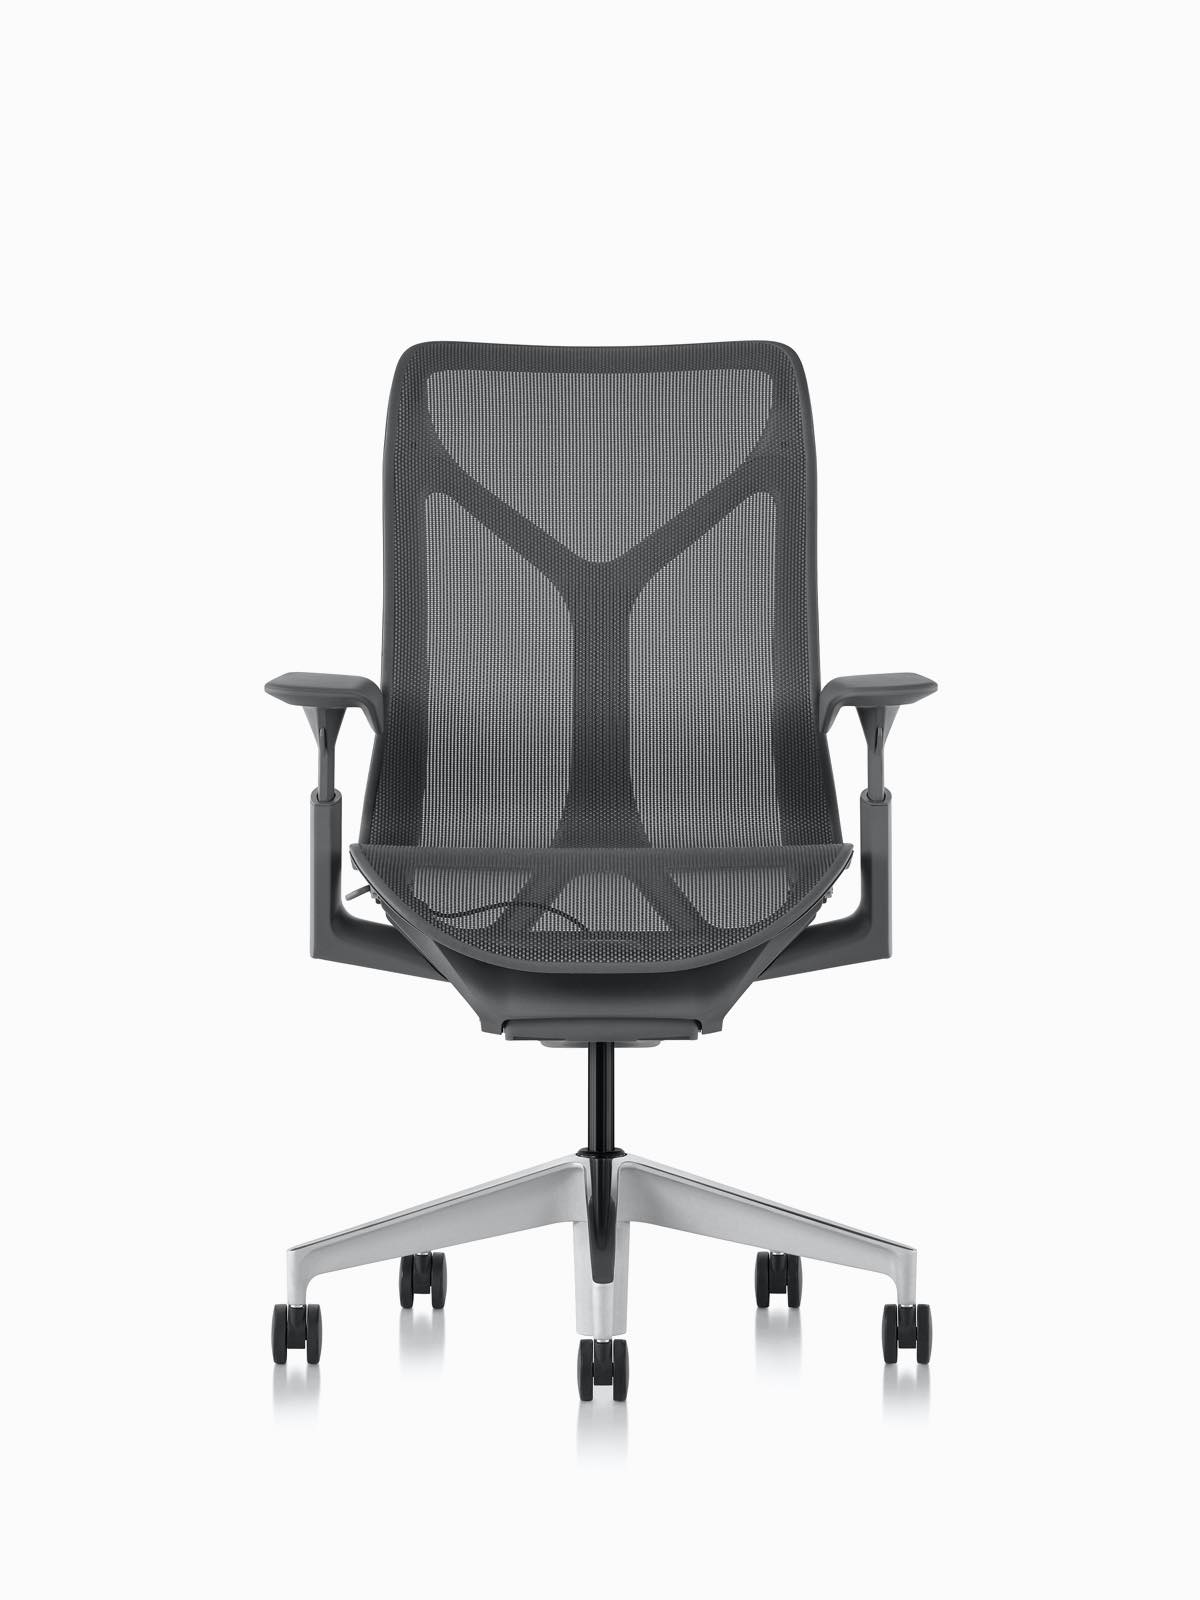 Cosm Chair, Mid Back. Select to go to the Cosm Chairs product page.